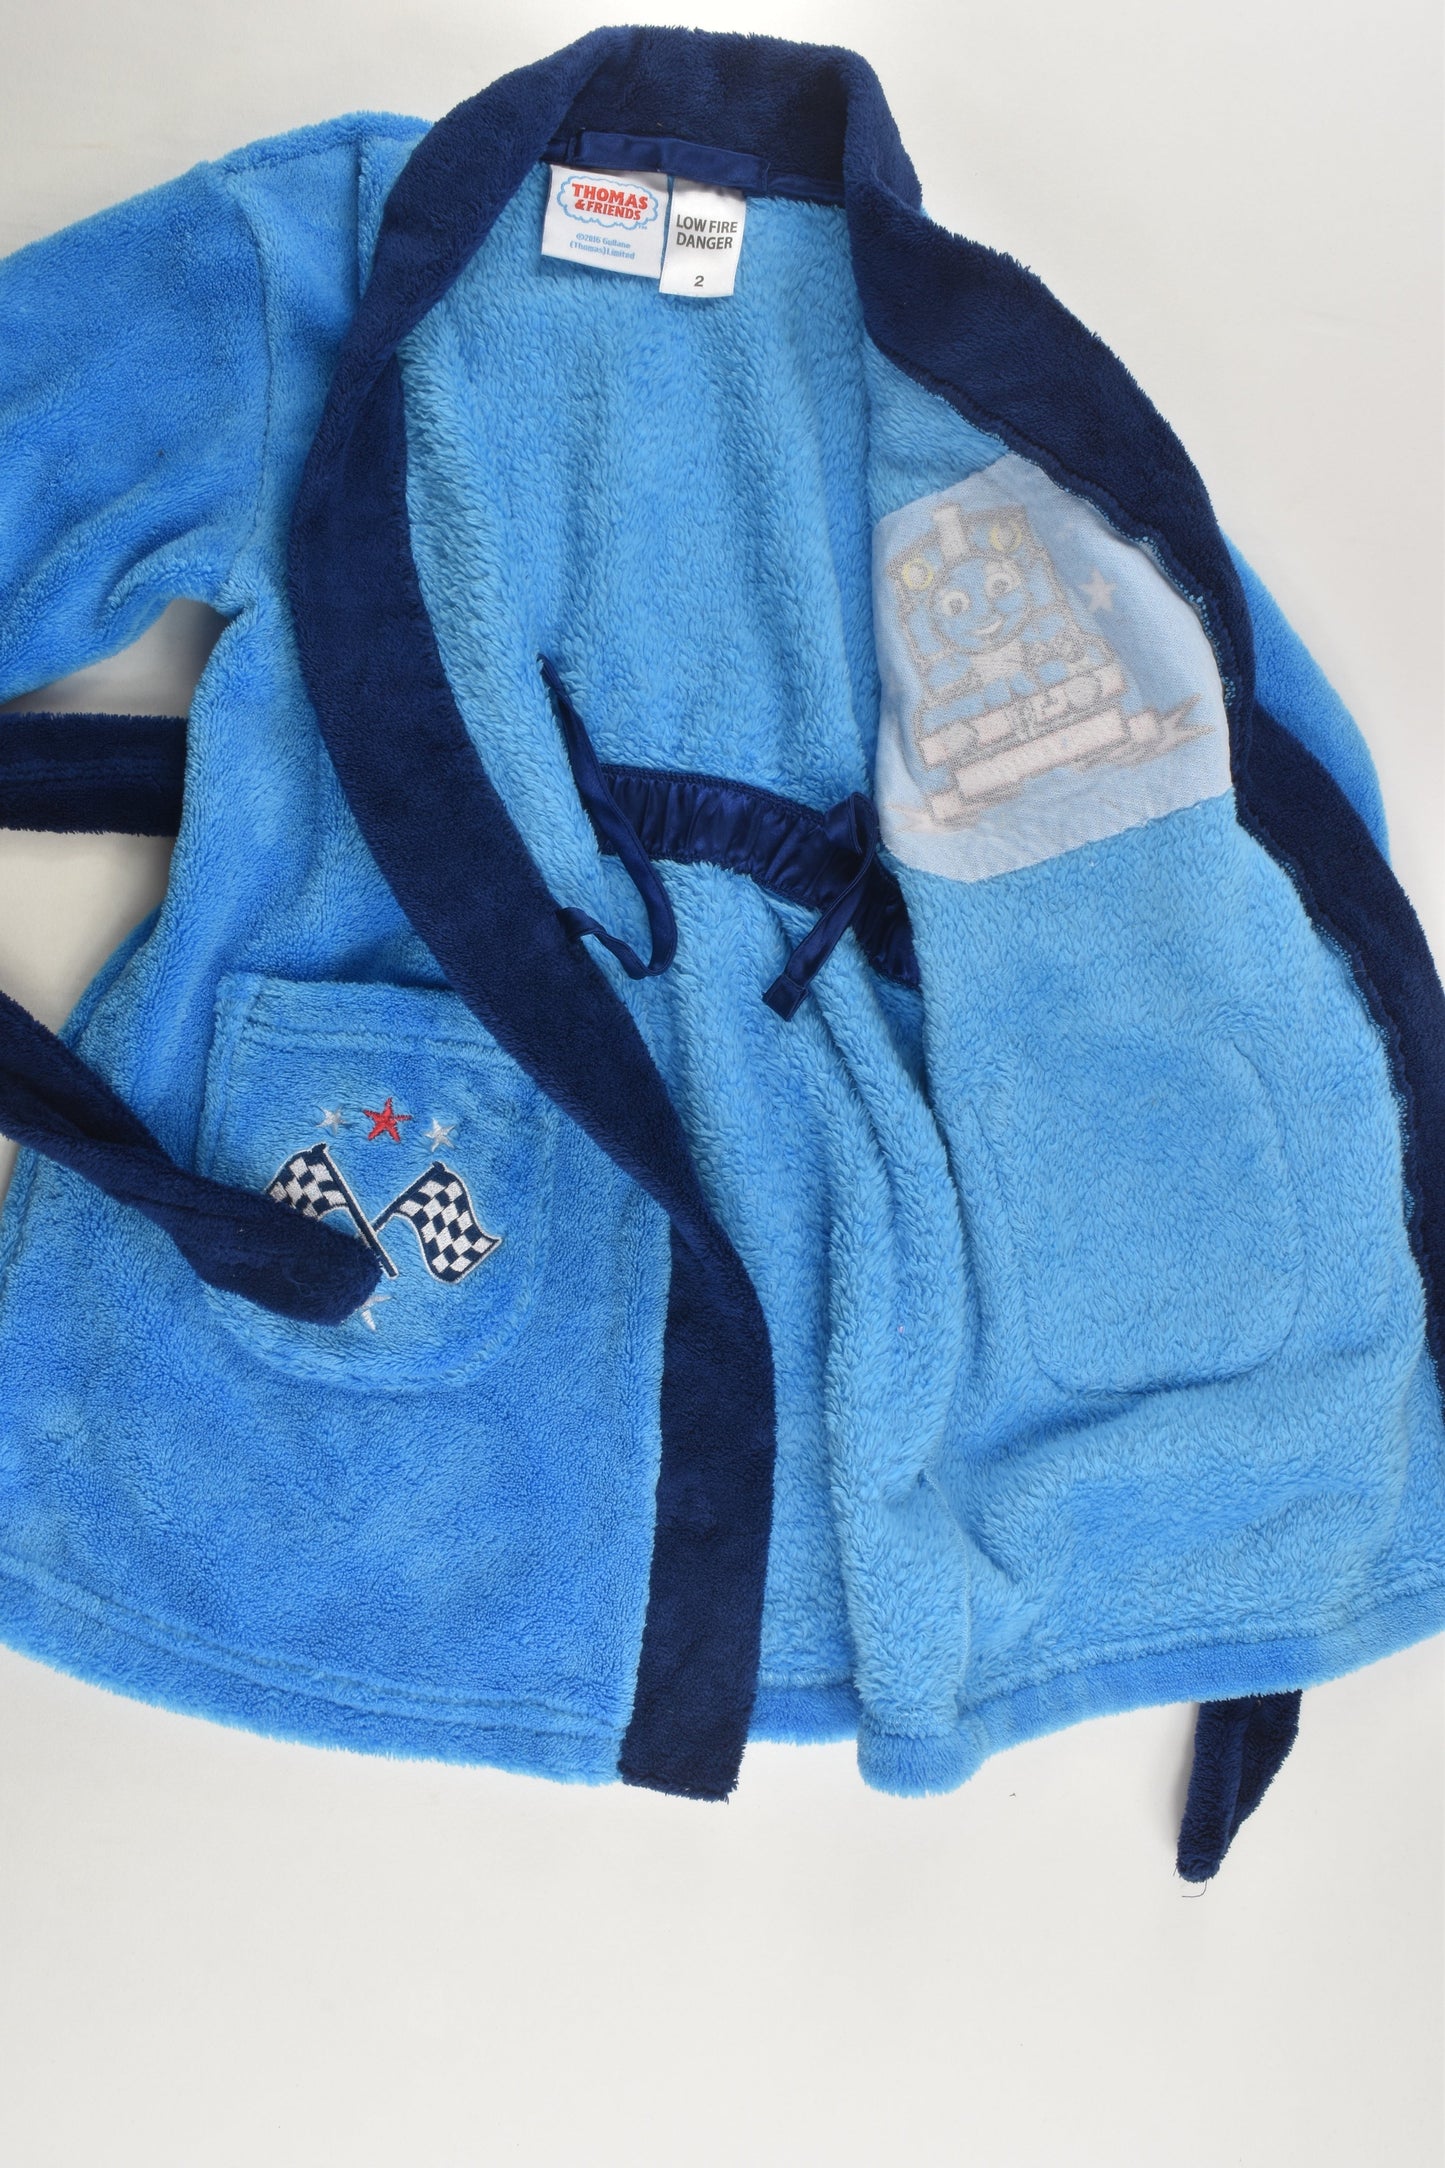 Thomas & Friends Size 2 Dressing Gown